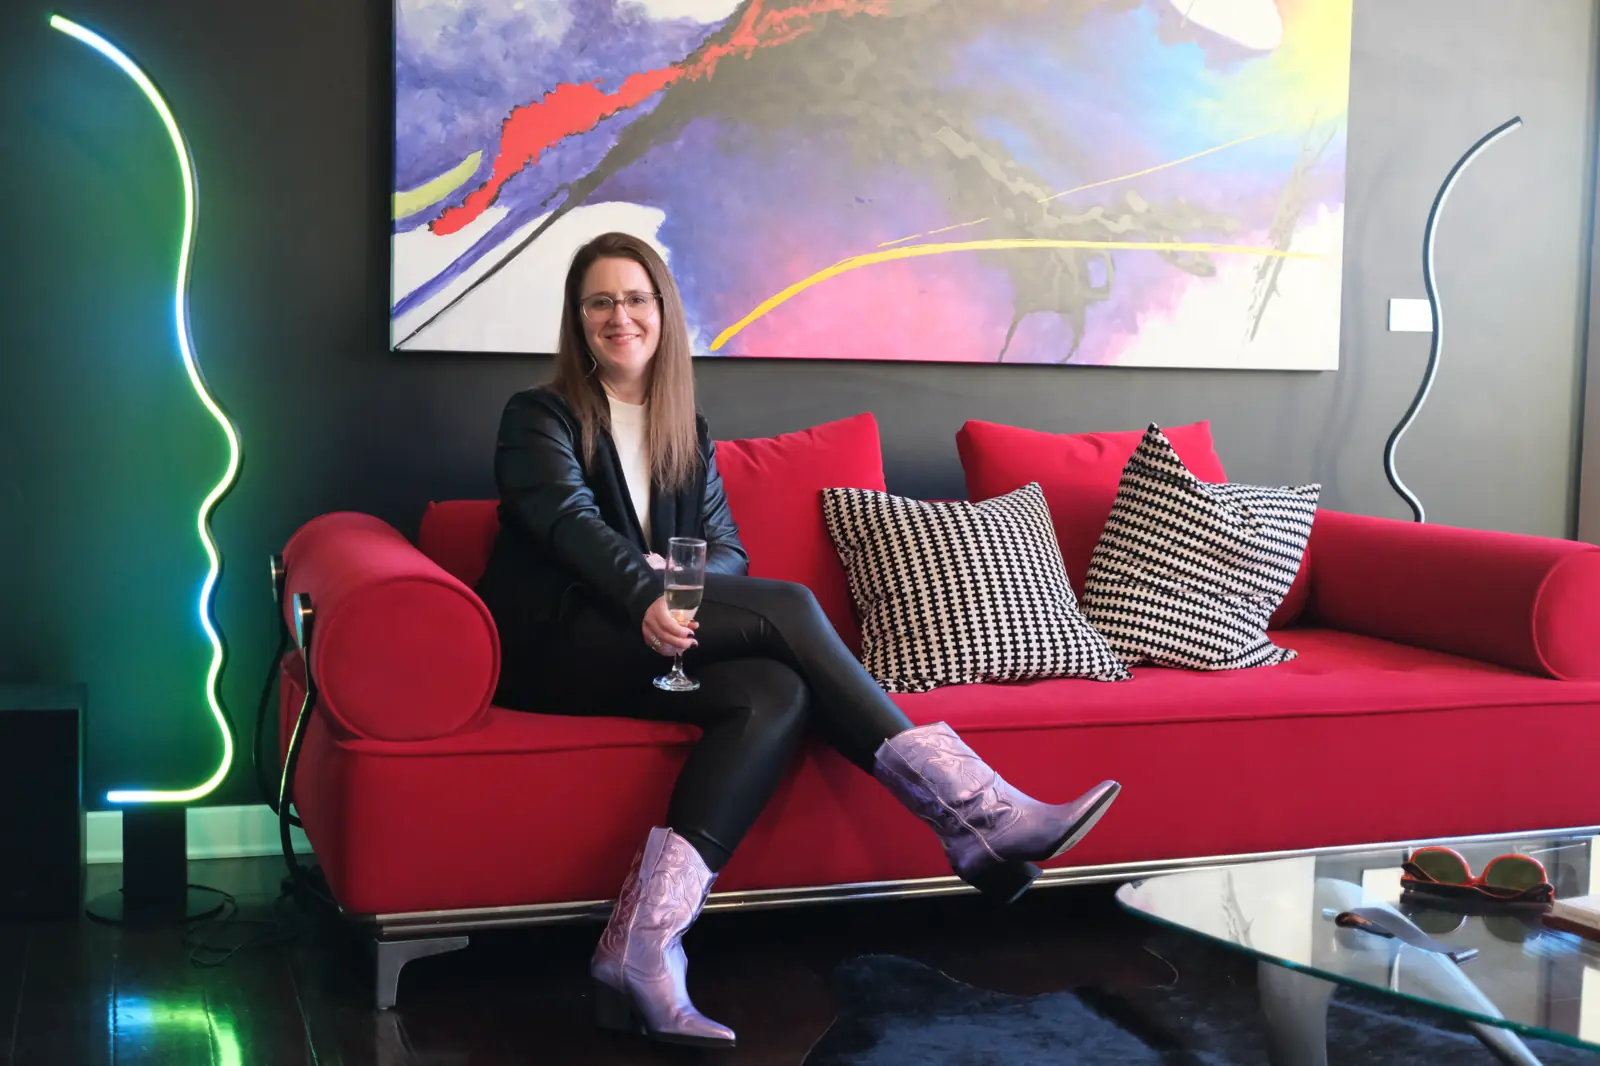 Adrienne dressed in black leather pants and jacket with purple cowgirl boots sitting cross-legged on a red couch